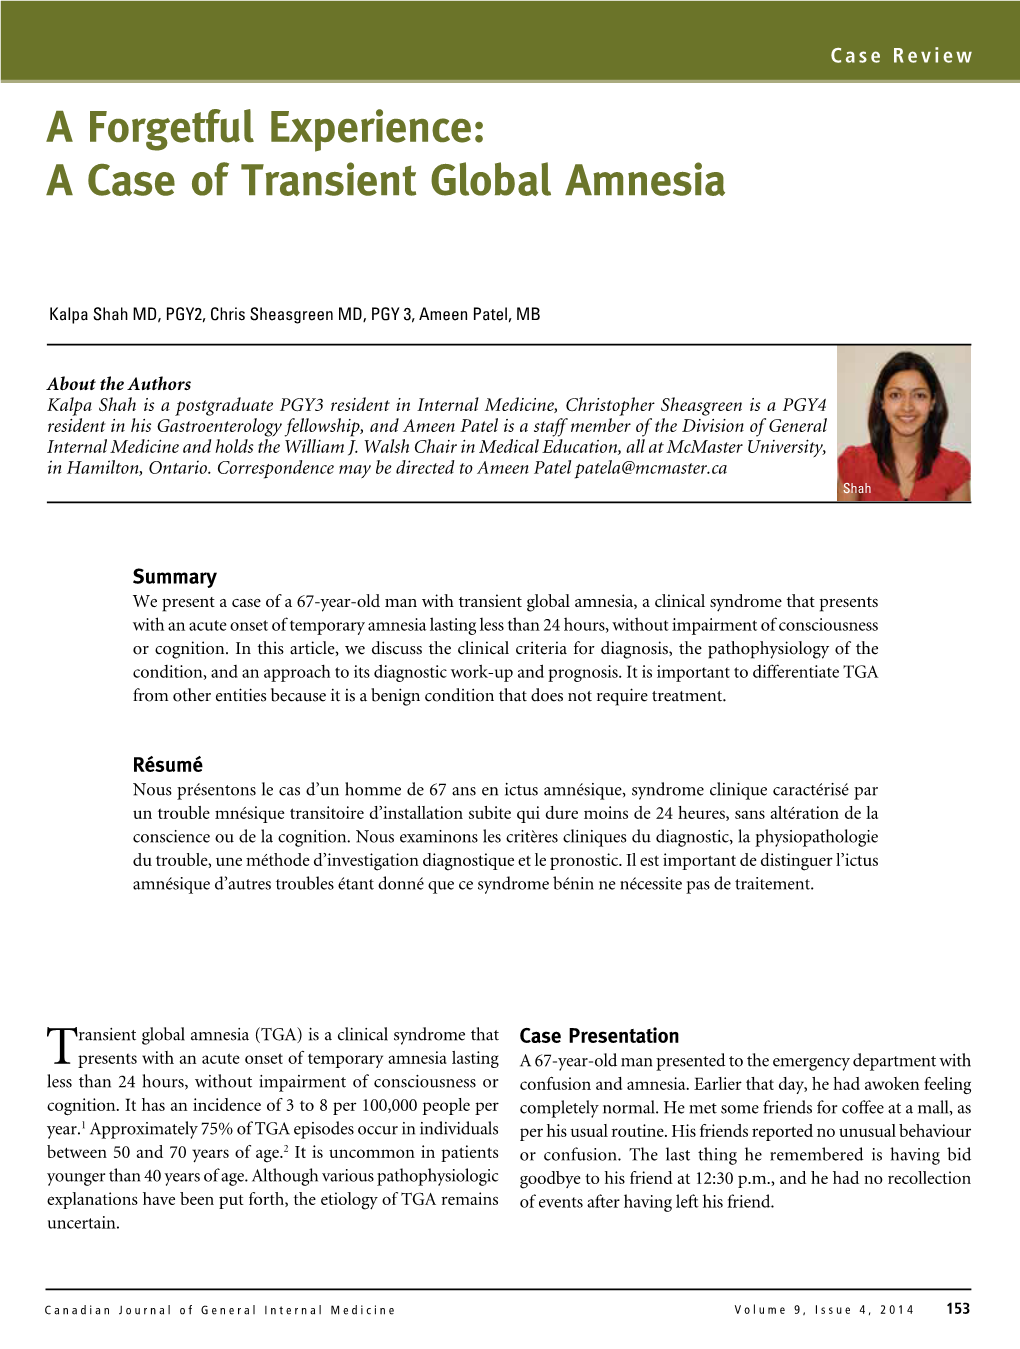 A Forgetful Experience: a Case of Transient Global Amnesia